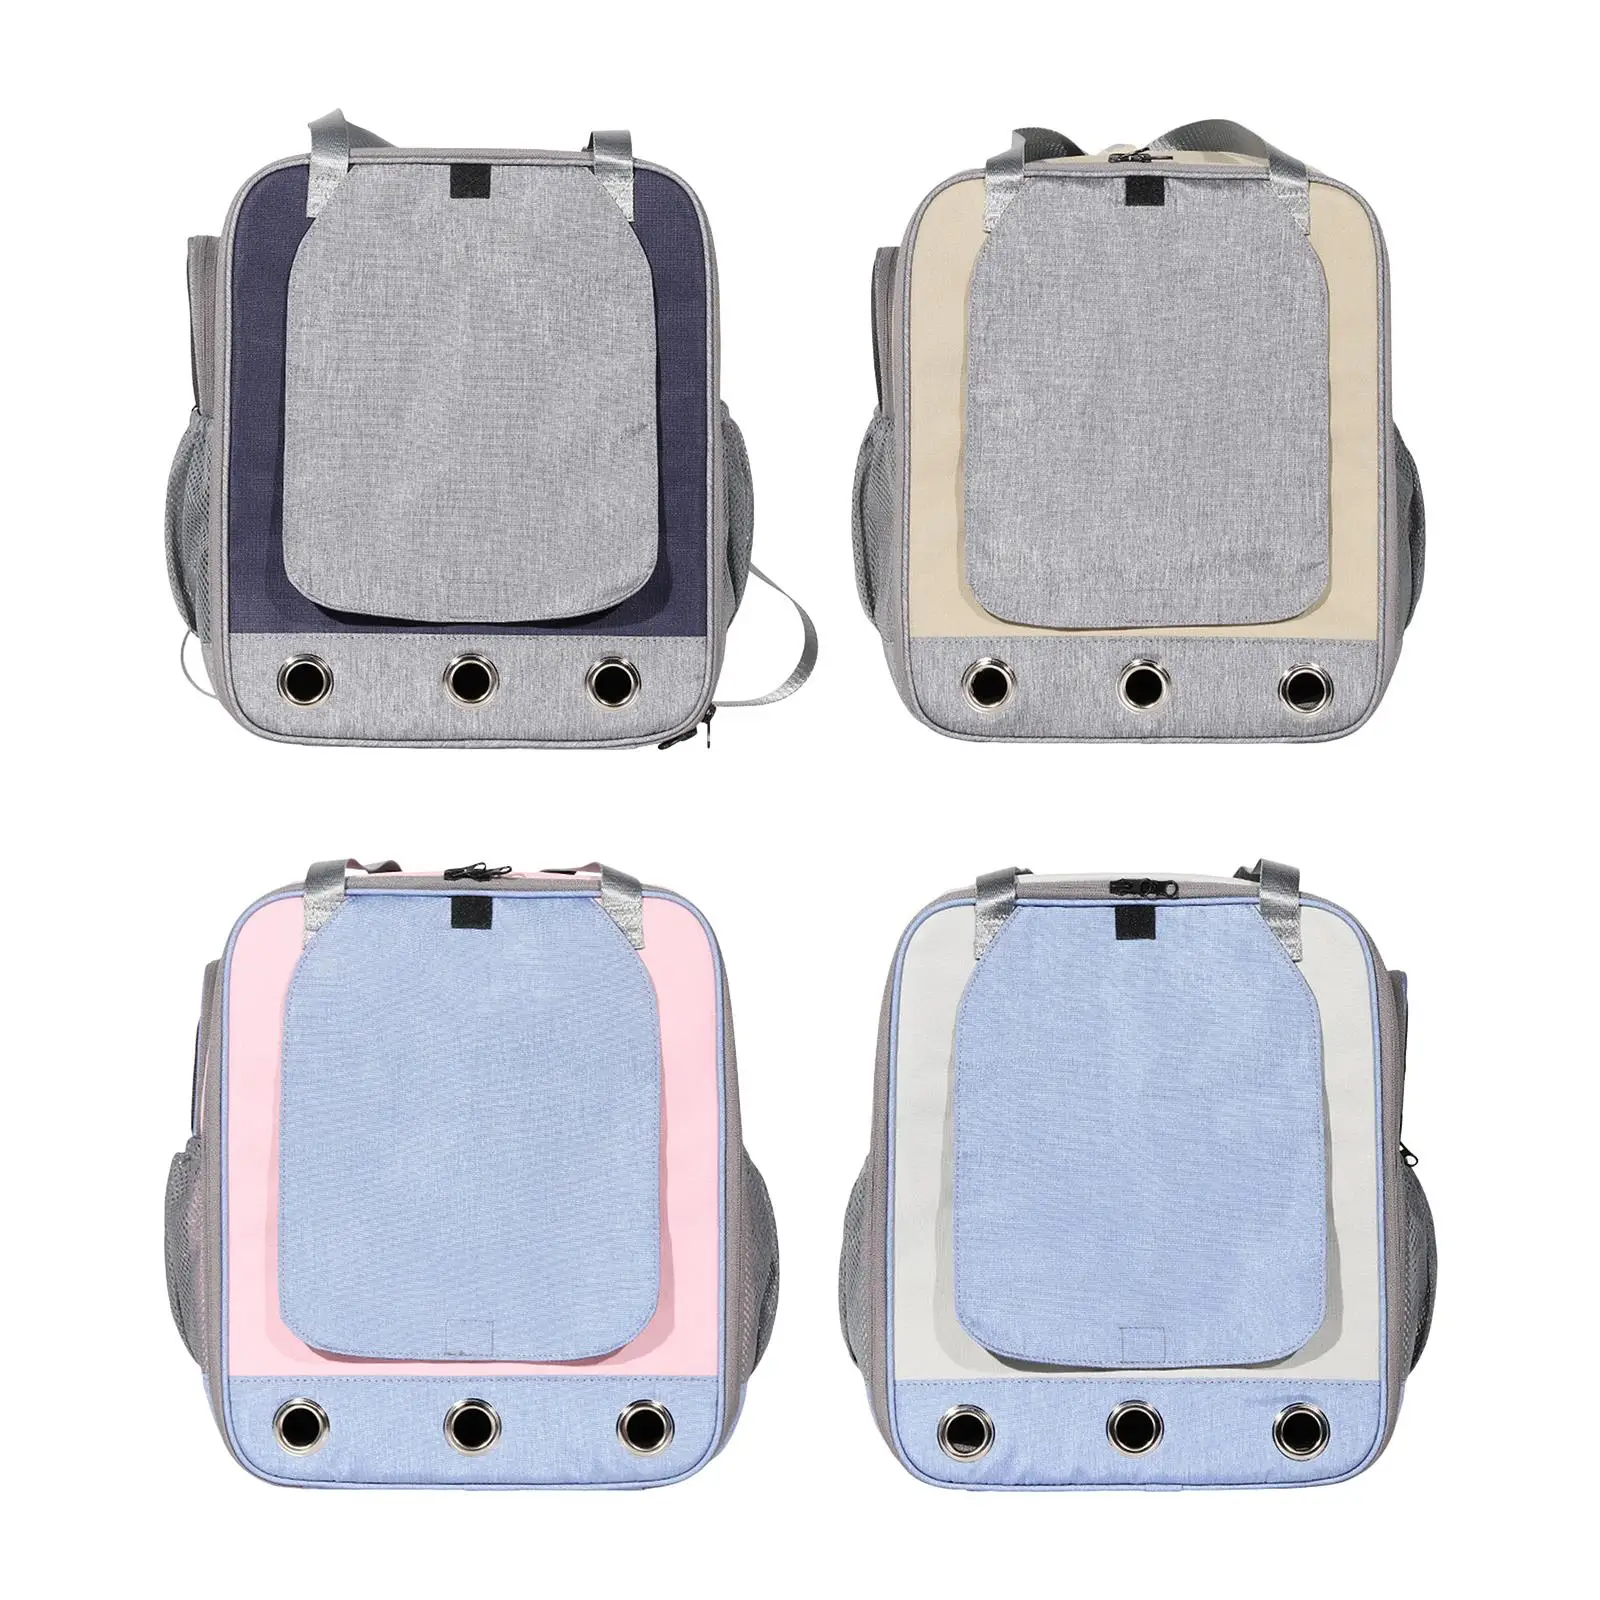 Comfortable Pet  Backpack Airline-Approved Shoulders Bag Handbag Cage for Dogs and Cats, Puppy Puppy Bunny Hiking Outdoor Use